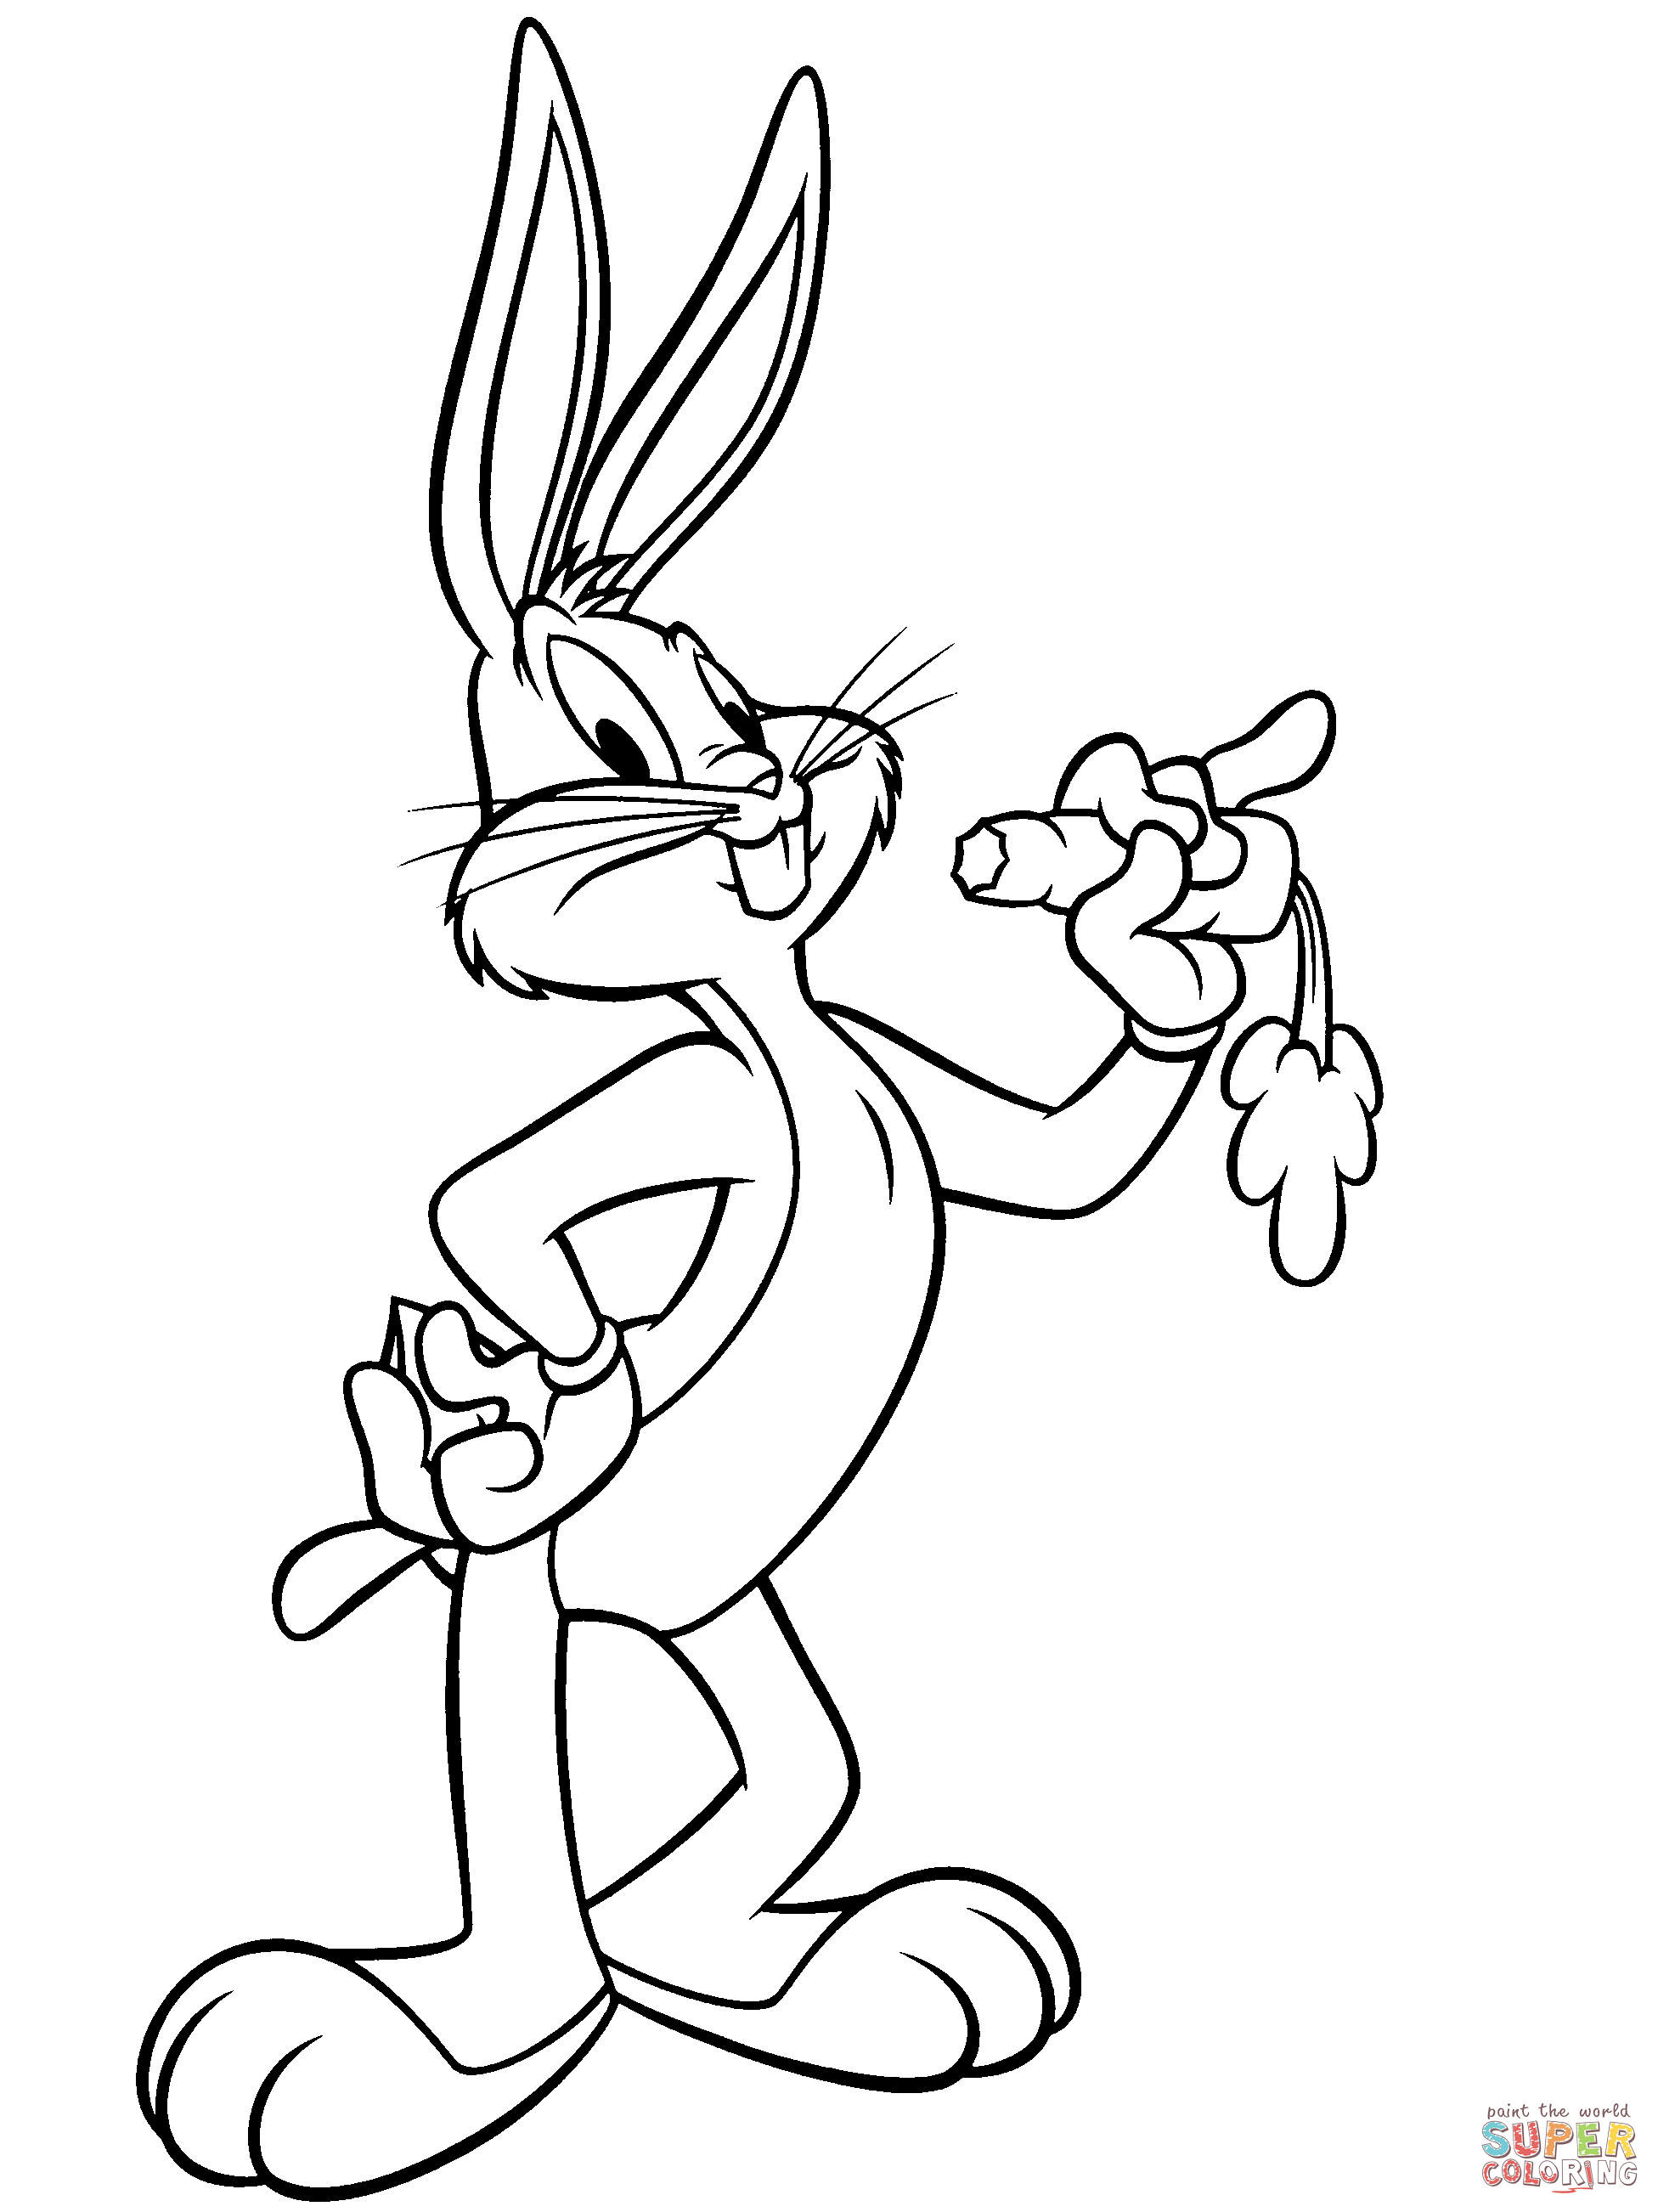 Free Printable Peter Rabbit Coloring Pages Coloring Page Bugs Bunny Coloring Page Free Printable Coloring